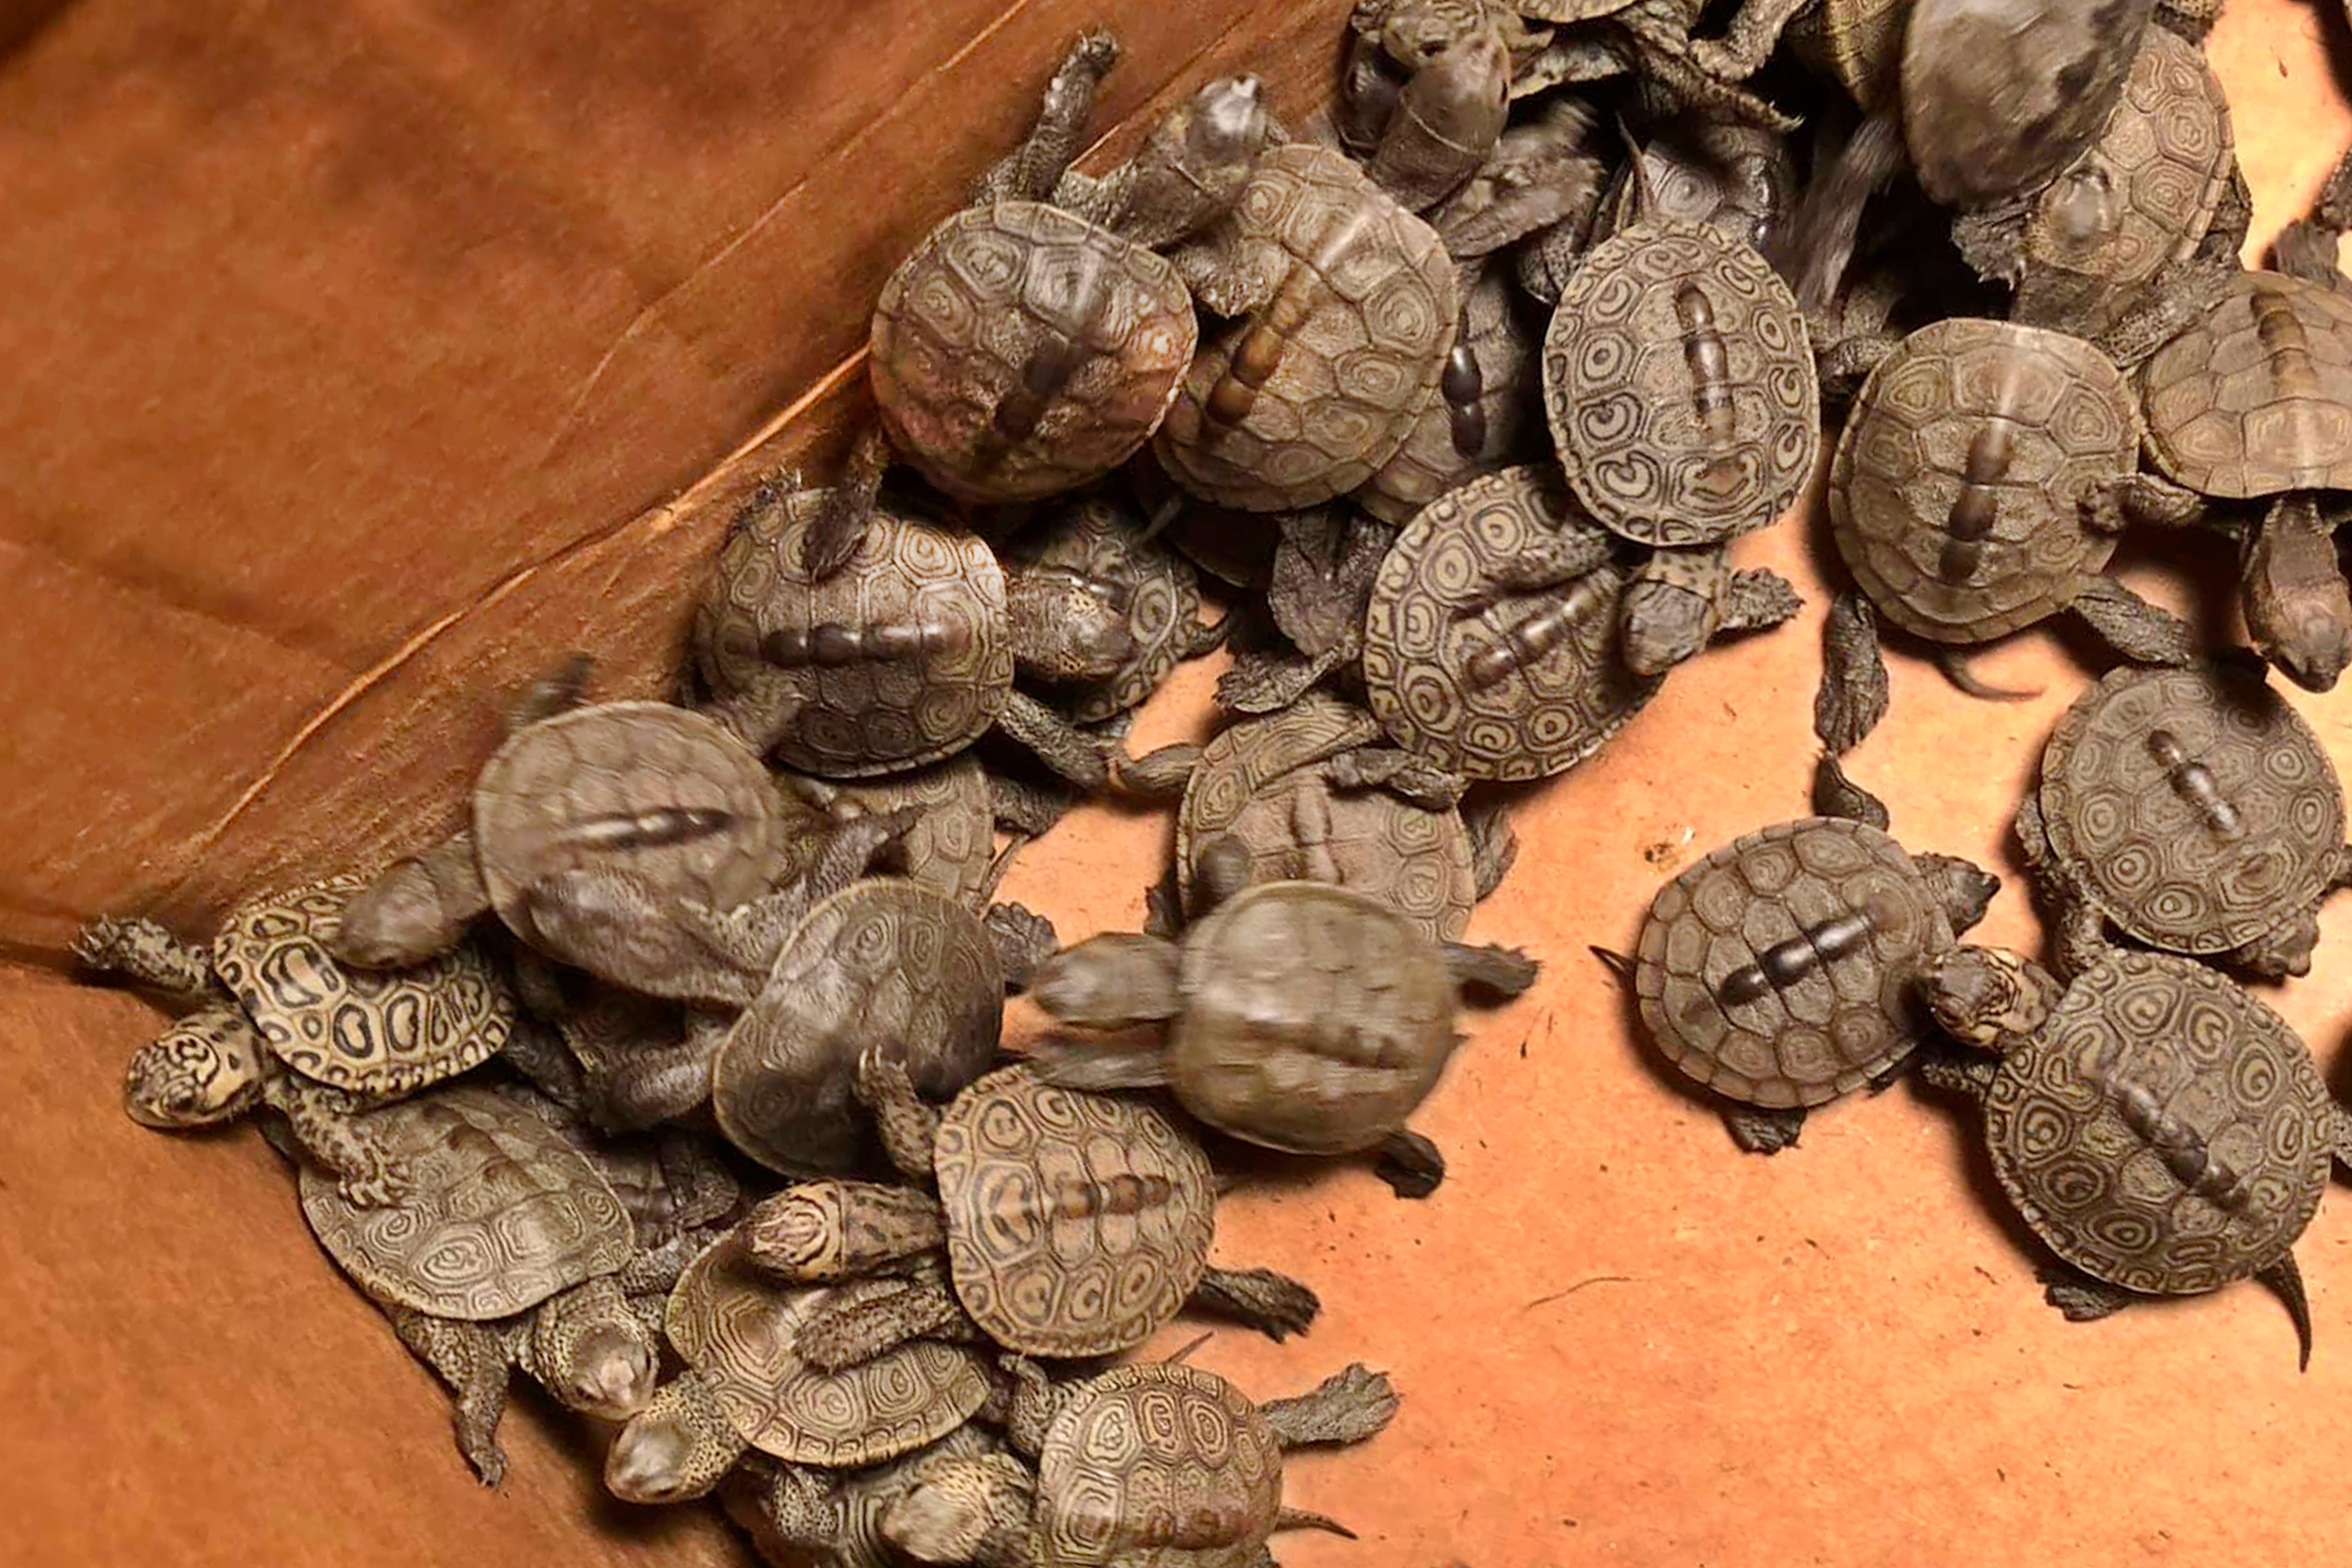 More than 800 turtles rescued from New Jersey storm drains